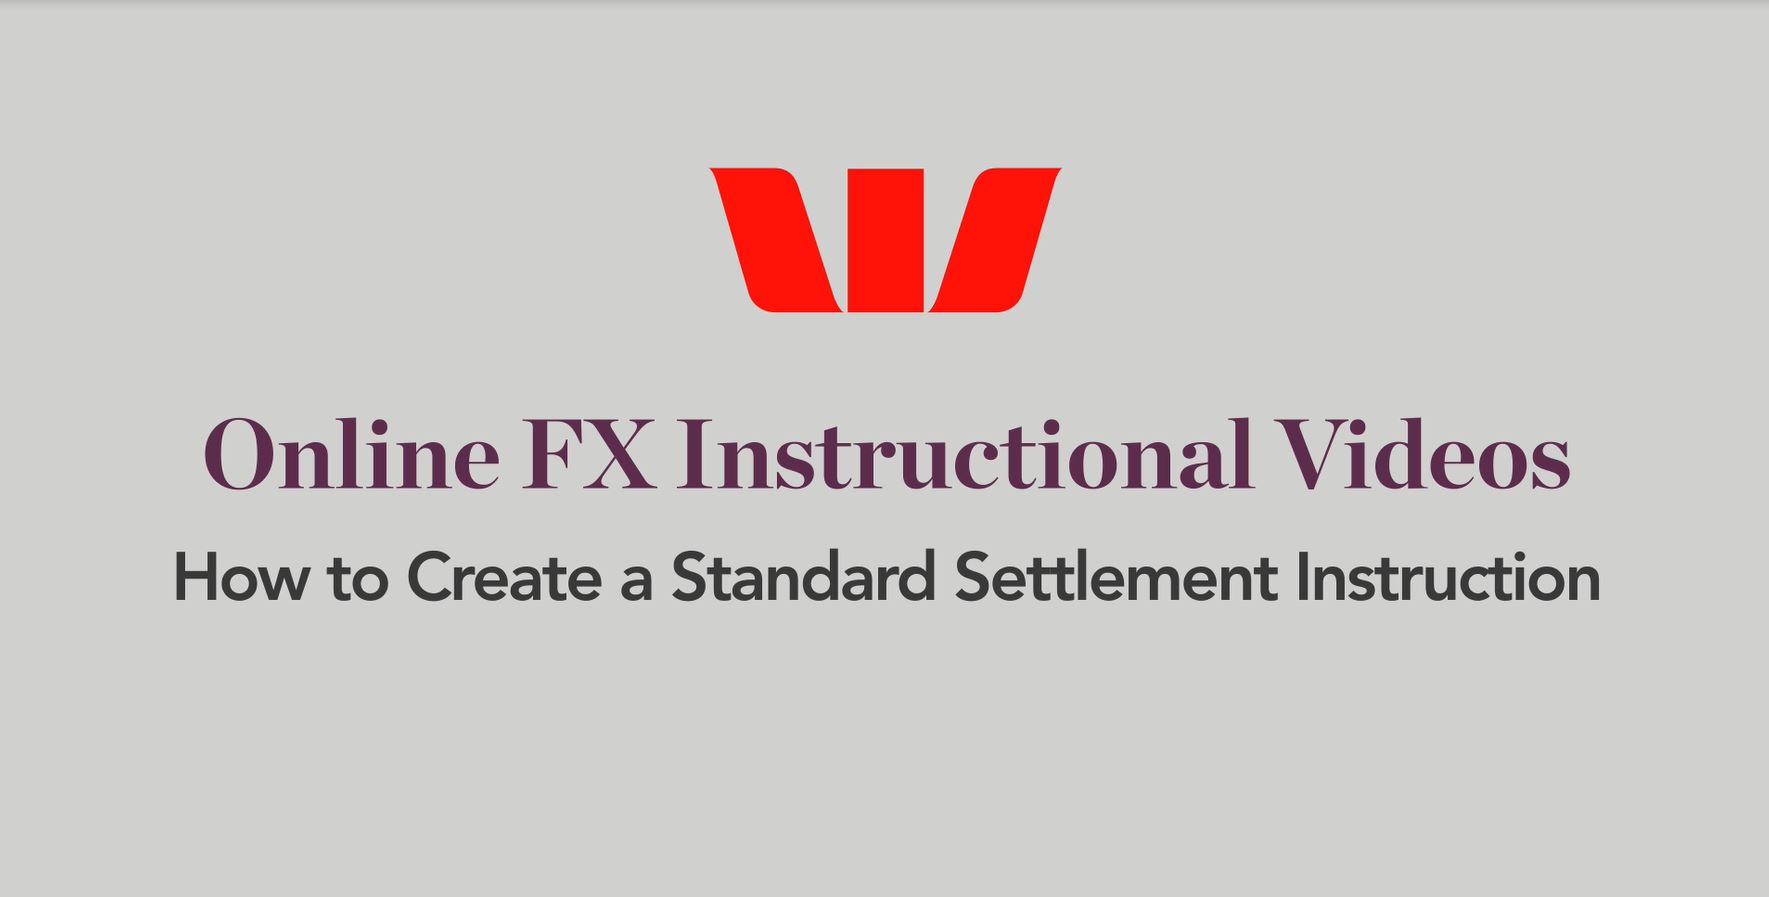 How to create a Standard Settlement Instruction